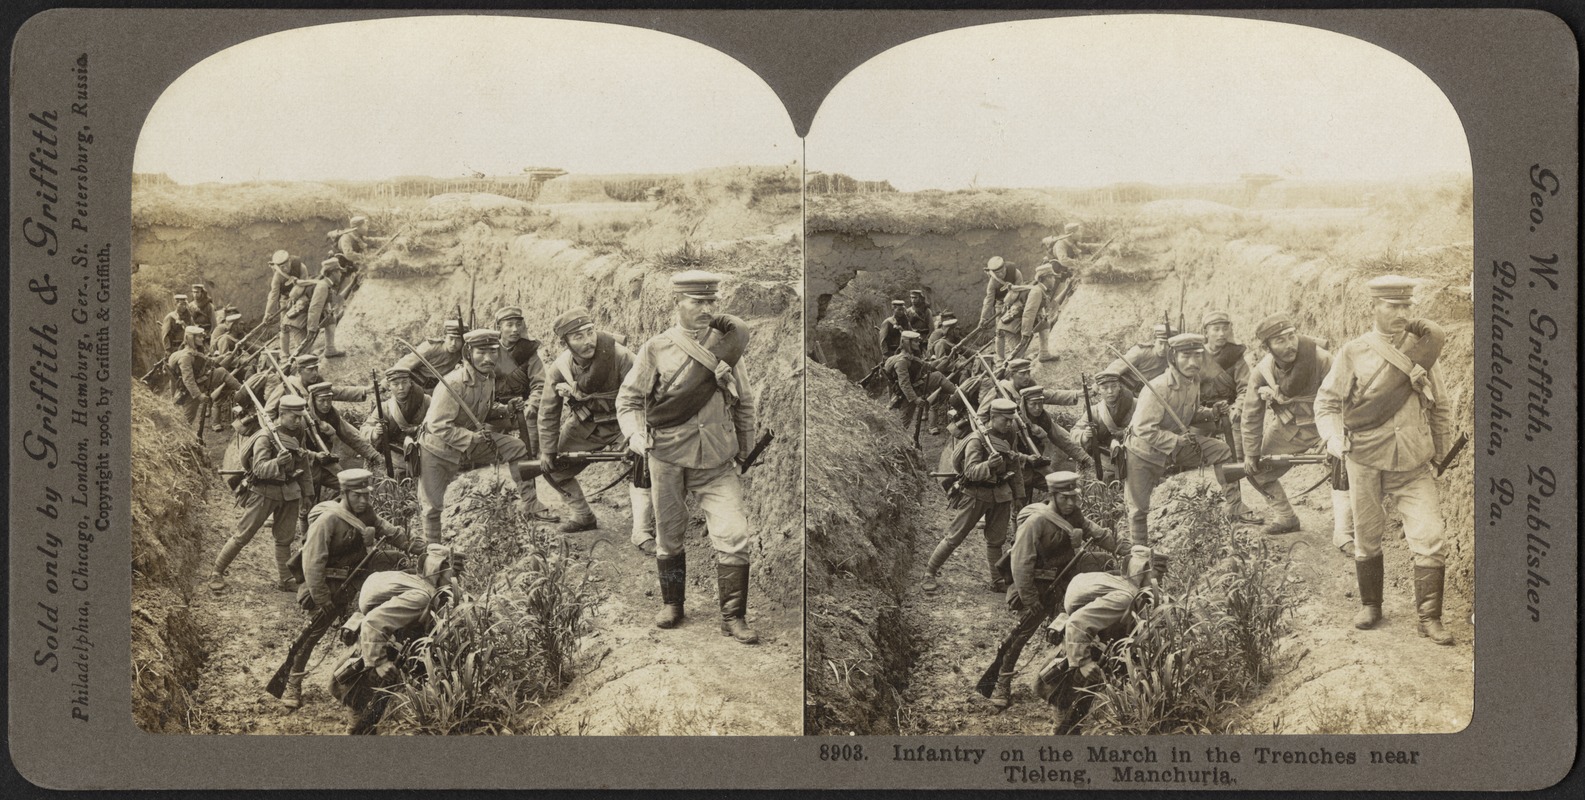 Infantry on the march in the trenches near Tieleng, Manchuria